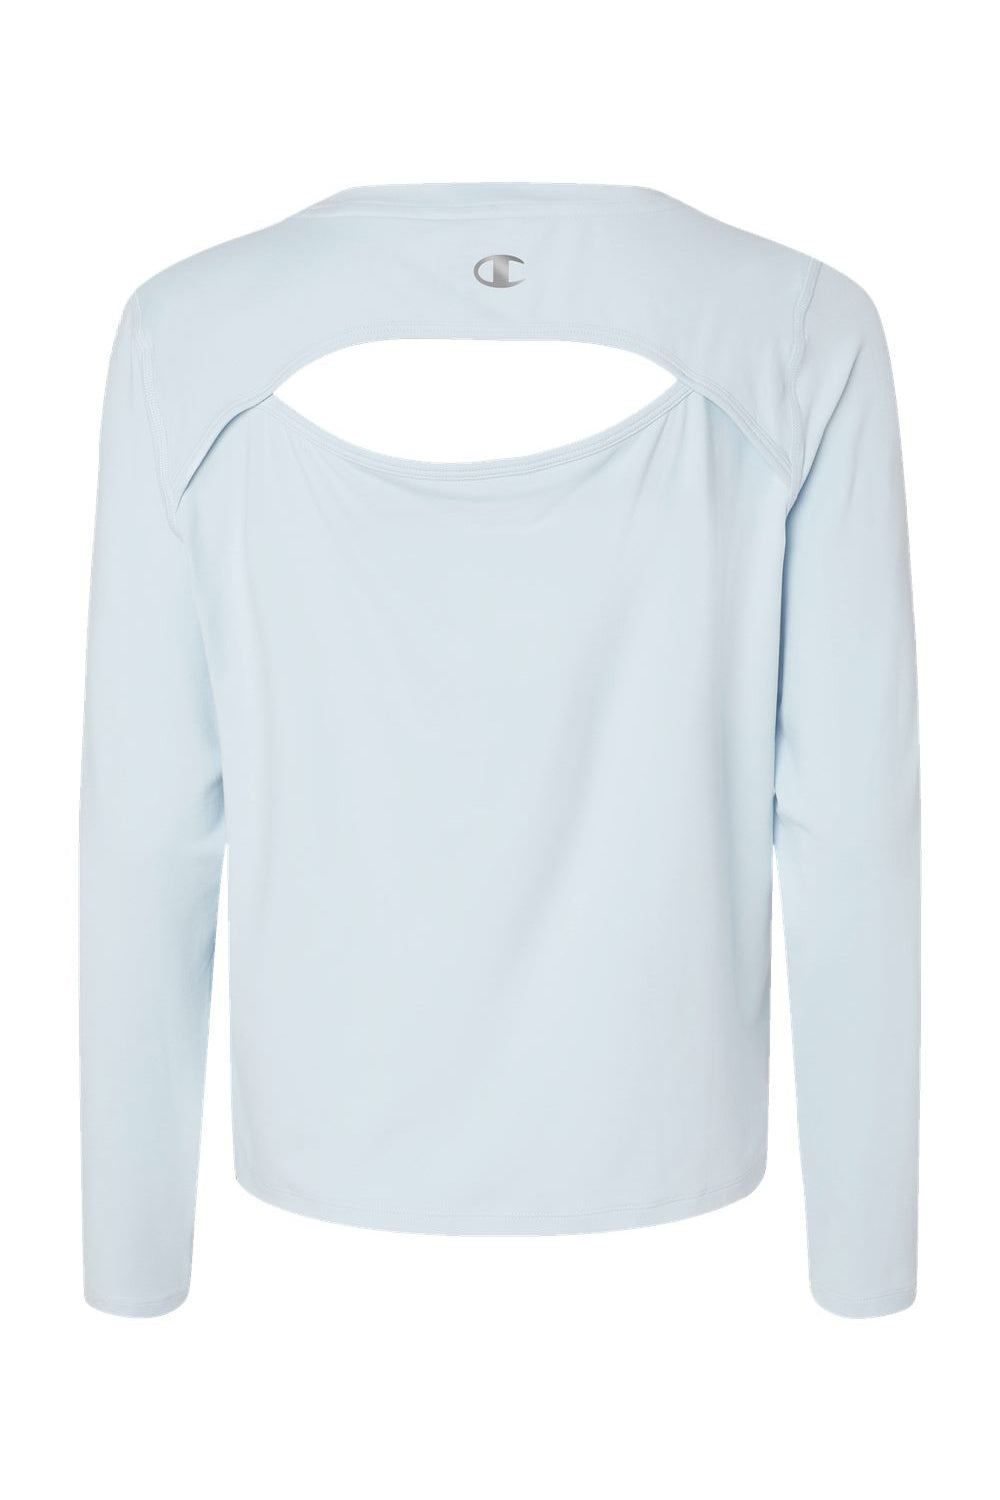 Champion CHP140 Womens Sport Soft Touch Long Sleeve Crewneck T-Shirt Collage Blue Flat Back